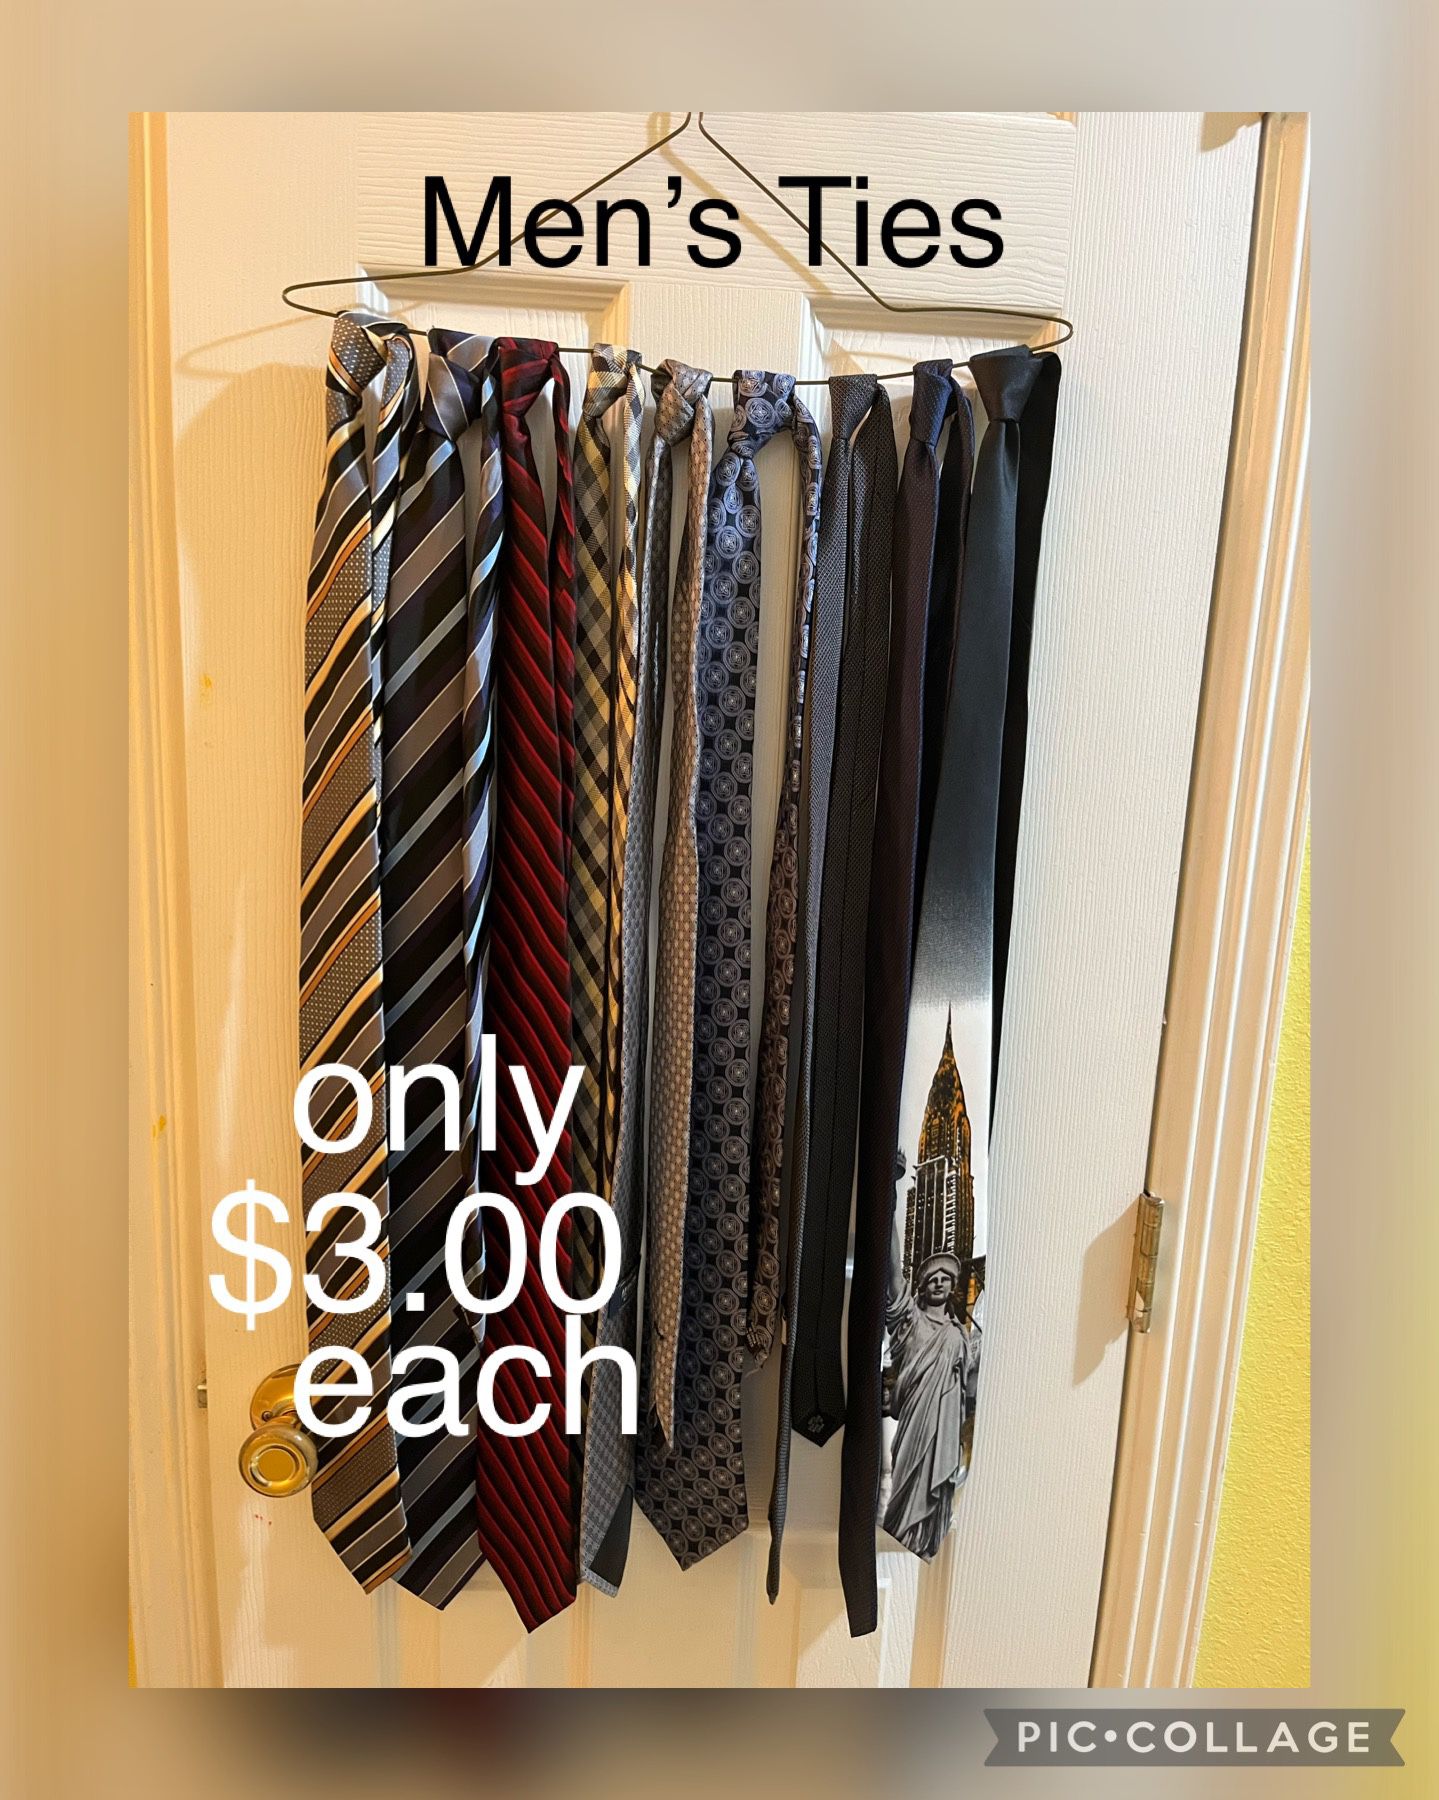 Stylish Ties For Men In San Benito Facebook 